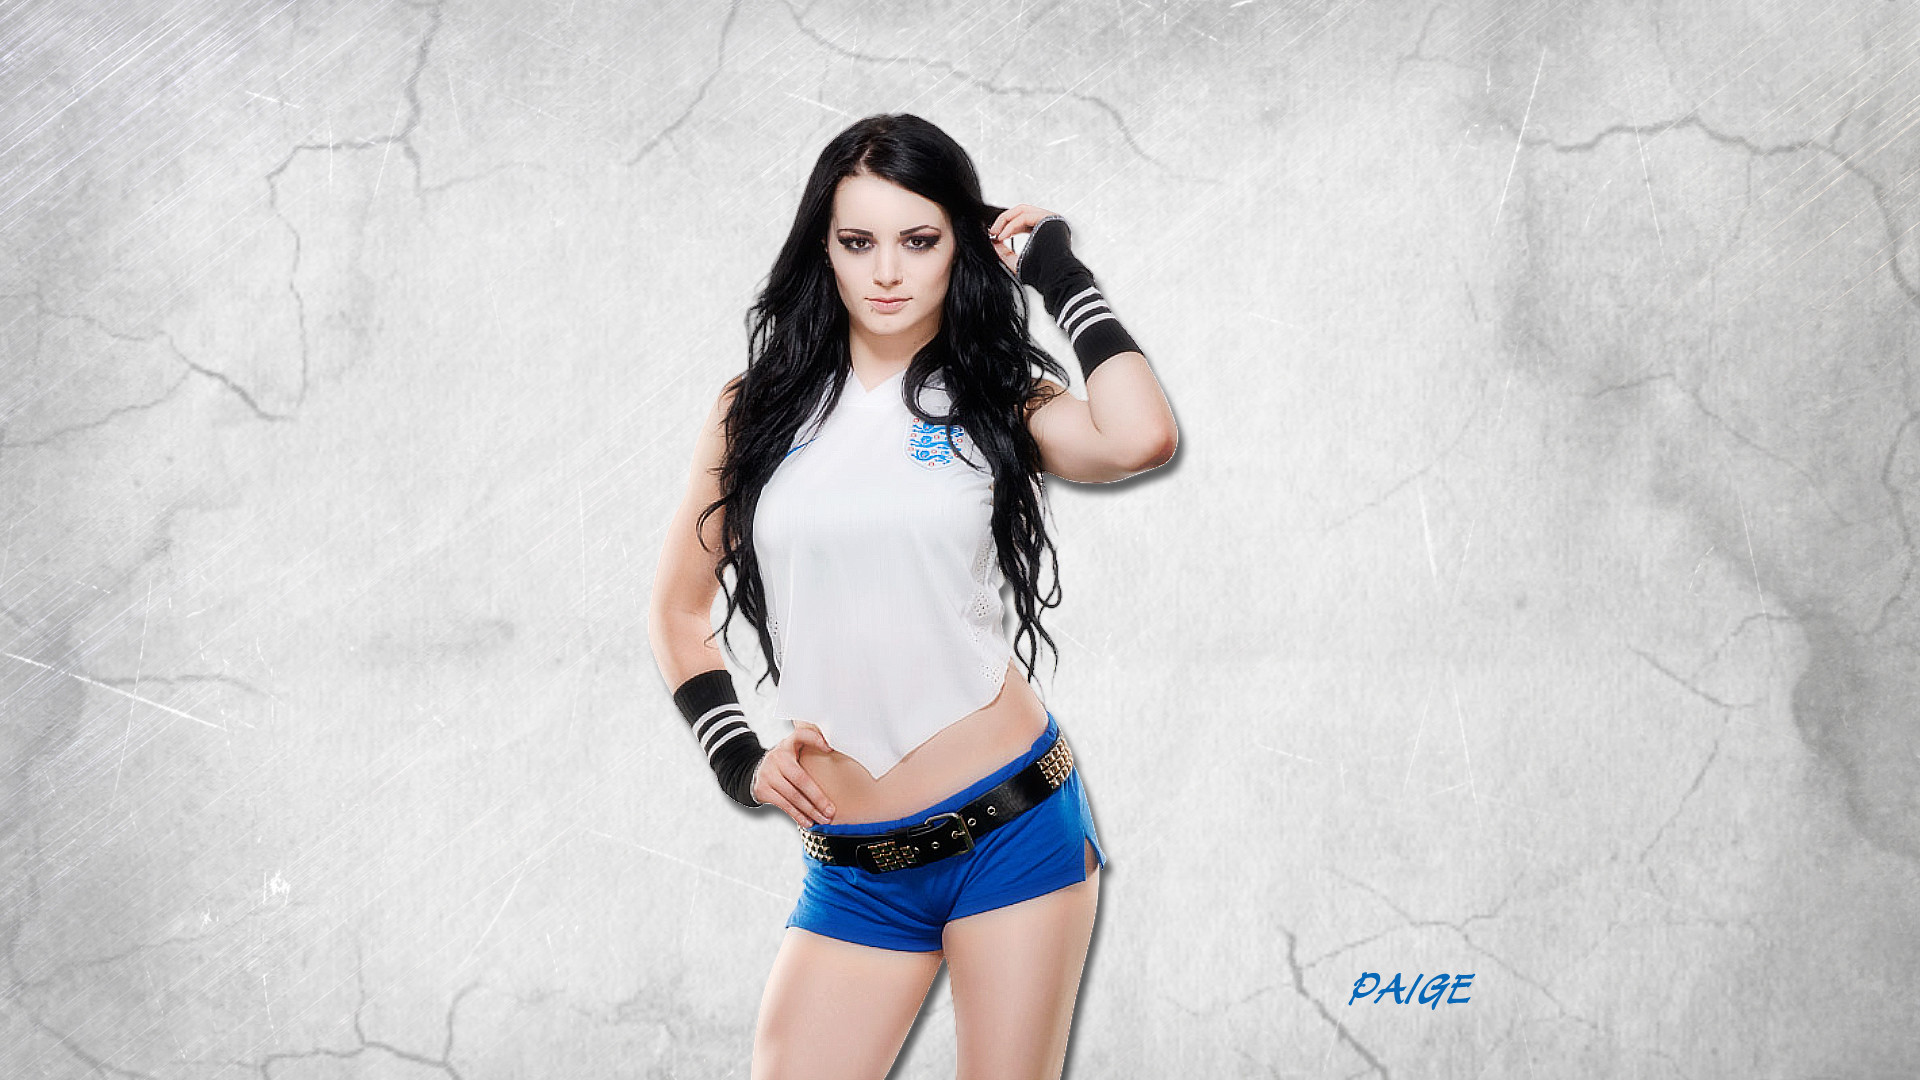 WWE Paige Wallpaper 72 images